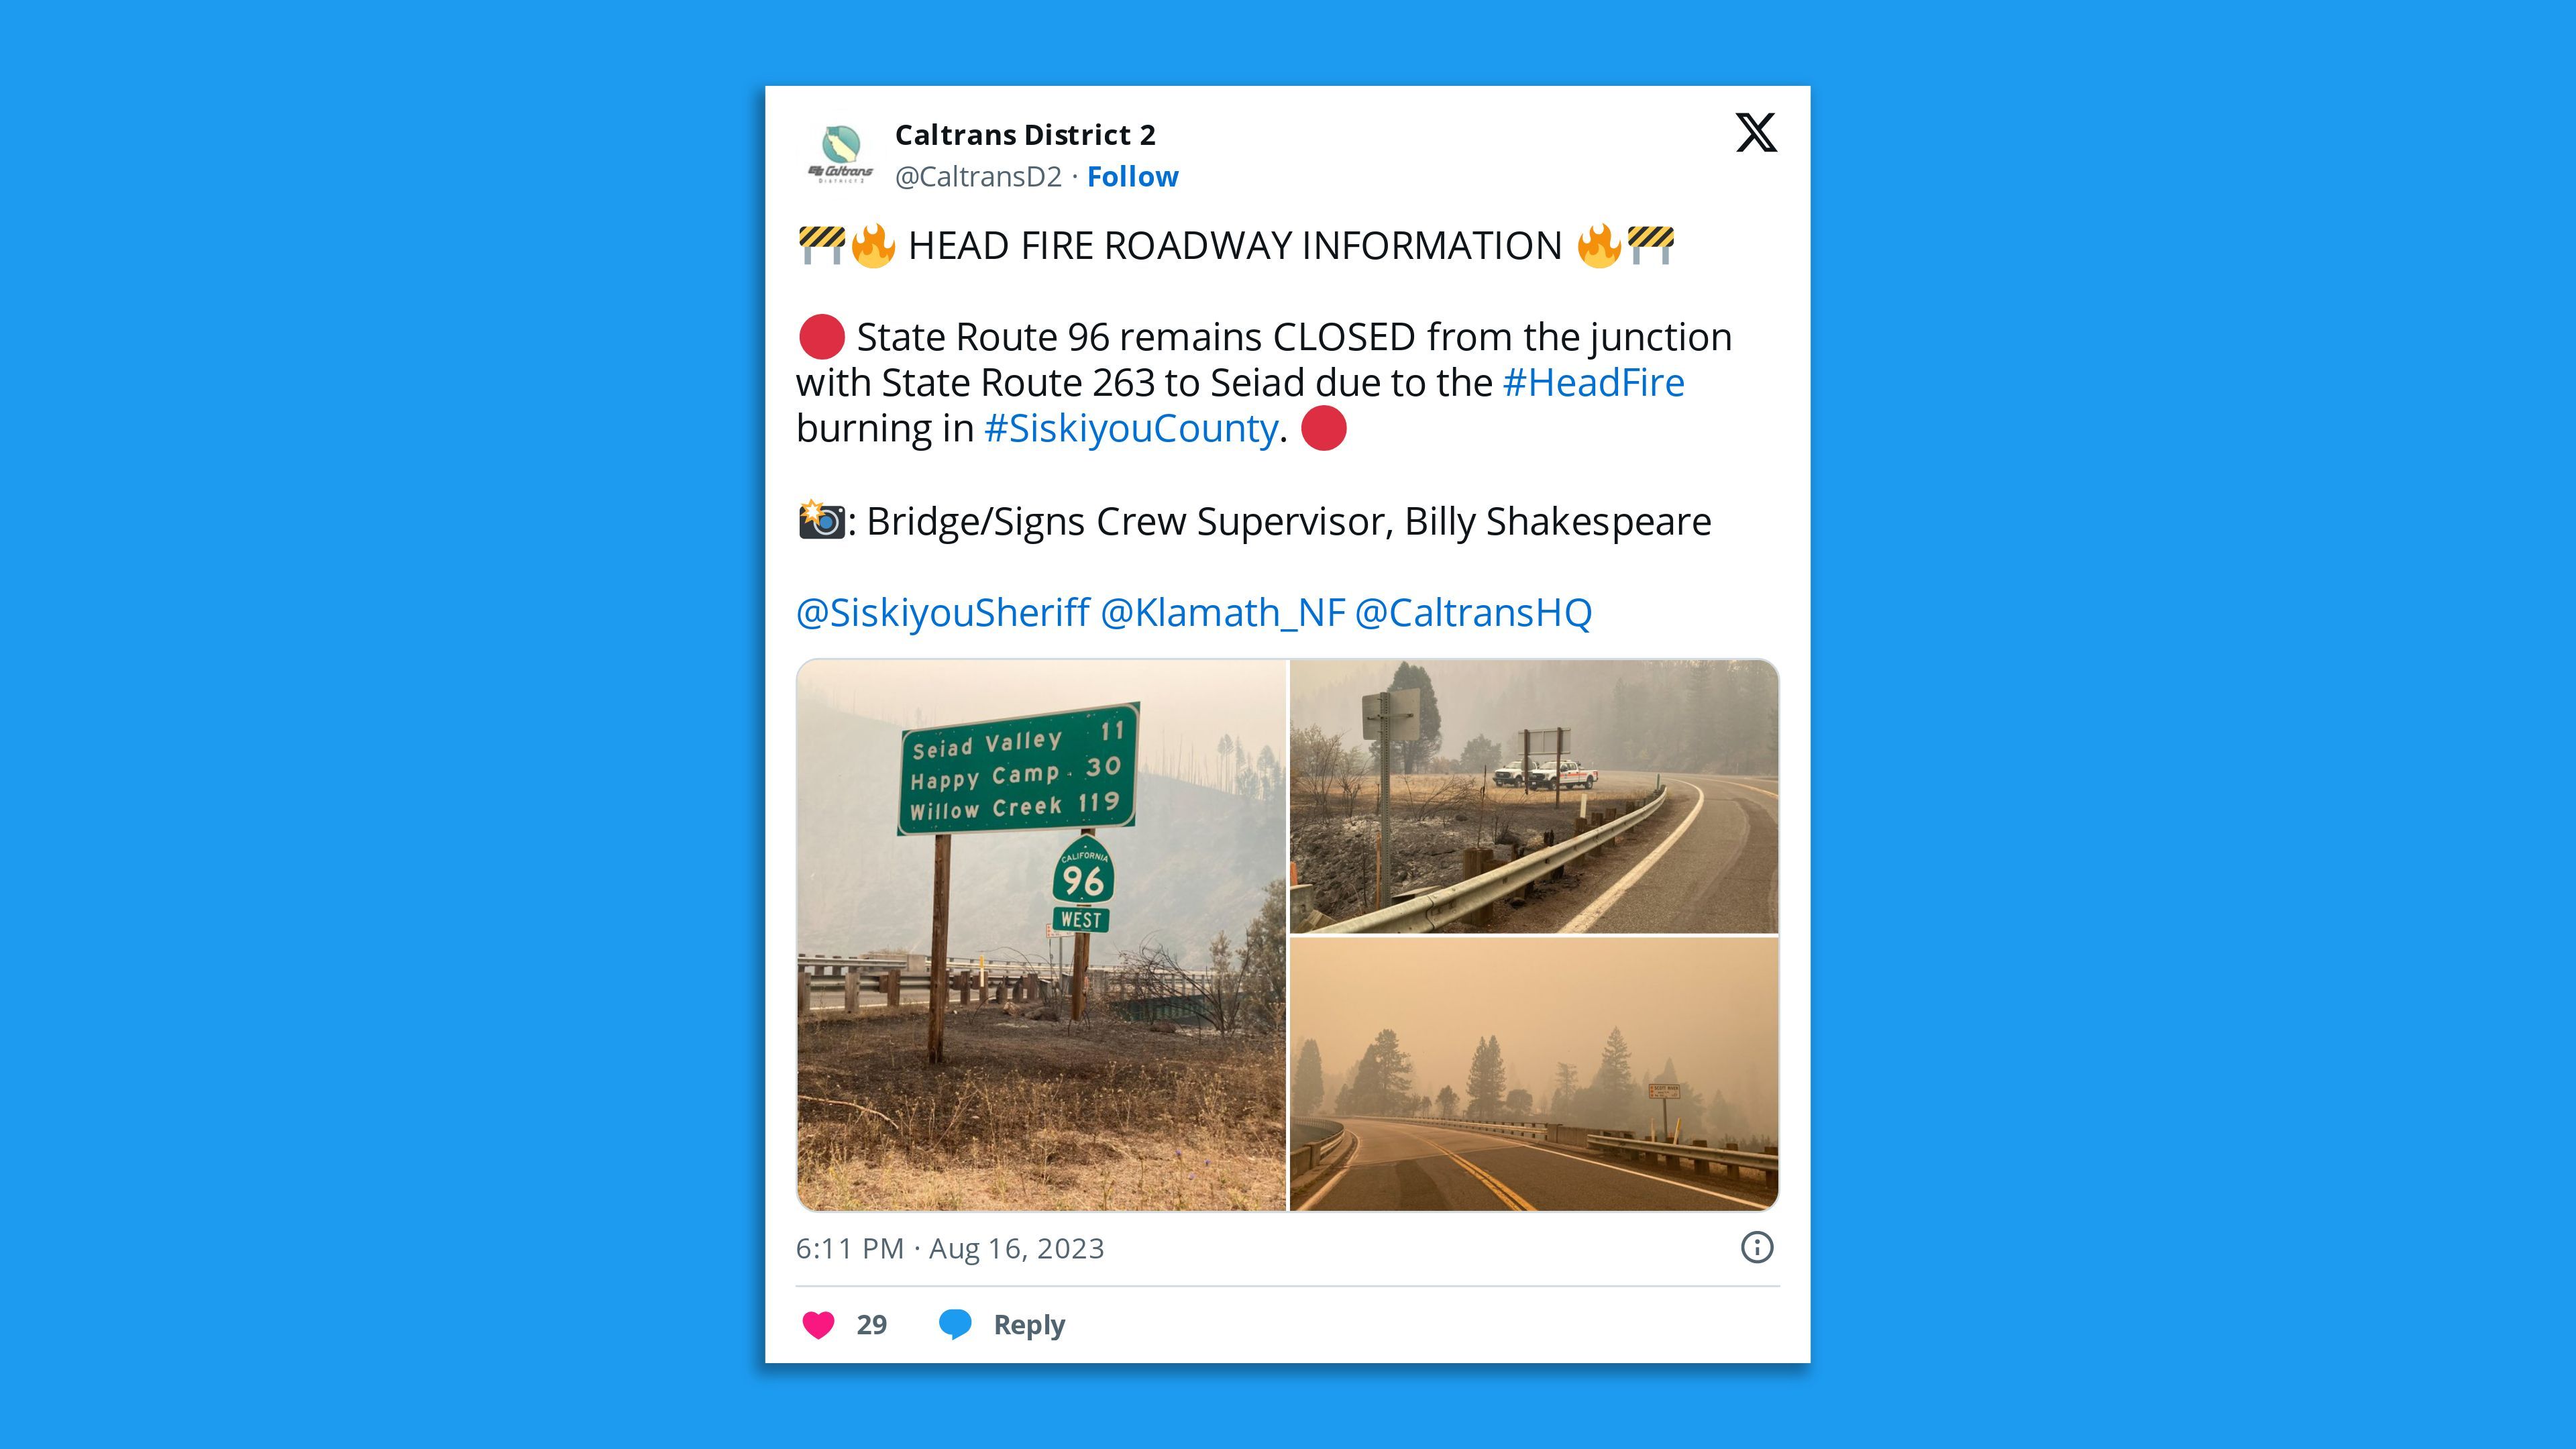 A screenshot of a Caltrans District 2 photo tweet of closed roads near a fire in Northern California with the comment: "🚧🔥 HEAD FIRE ROADWAY INFORMATION 🔥🚧  🔴 State Route 96 remains CLOSED from the junction with State Route 263 to Seiad due to the #HeadFire burning in #SiskiyouCounty. 🔴"